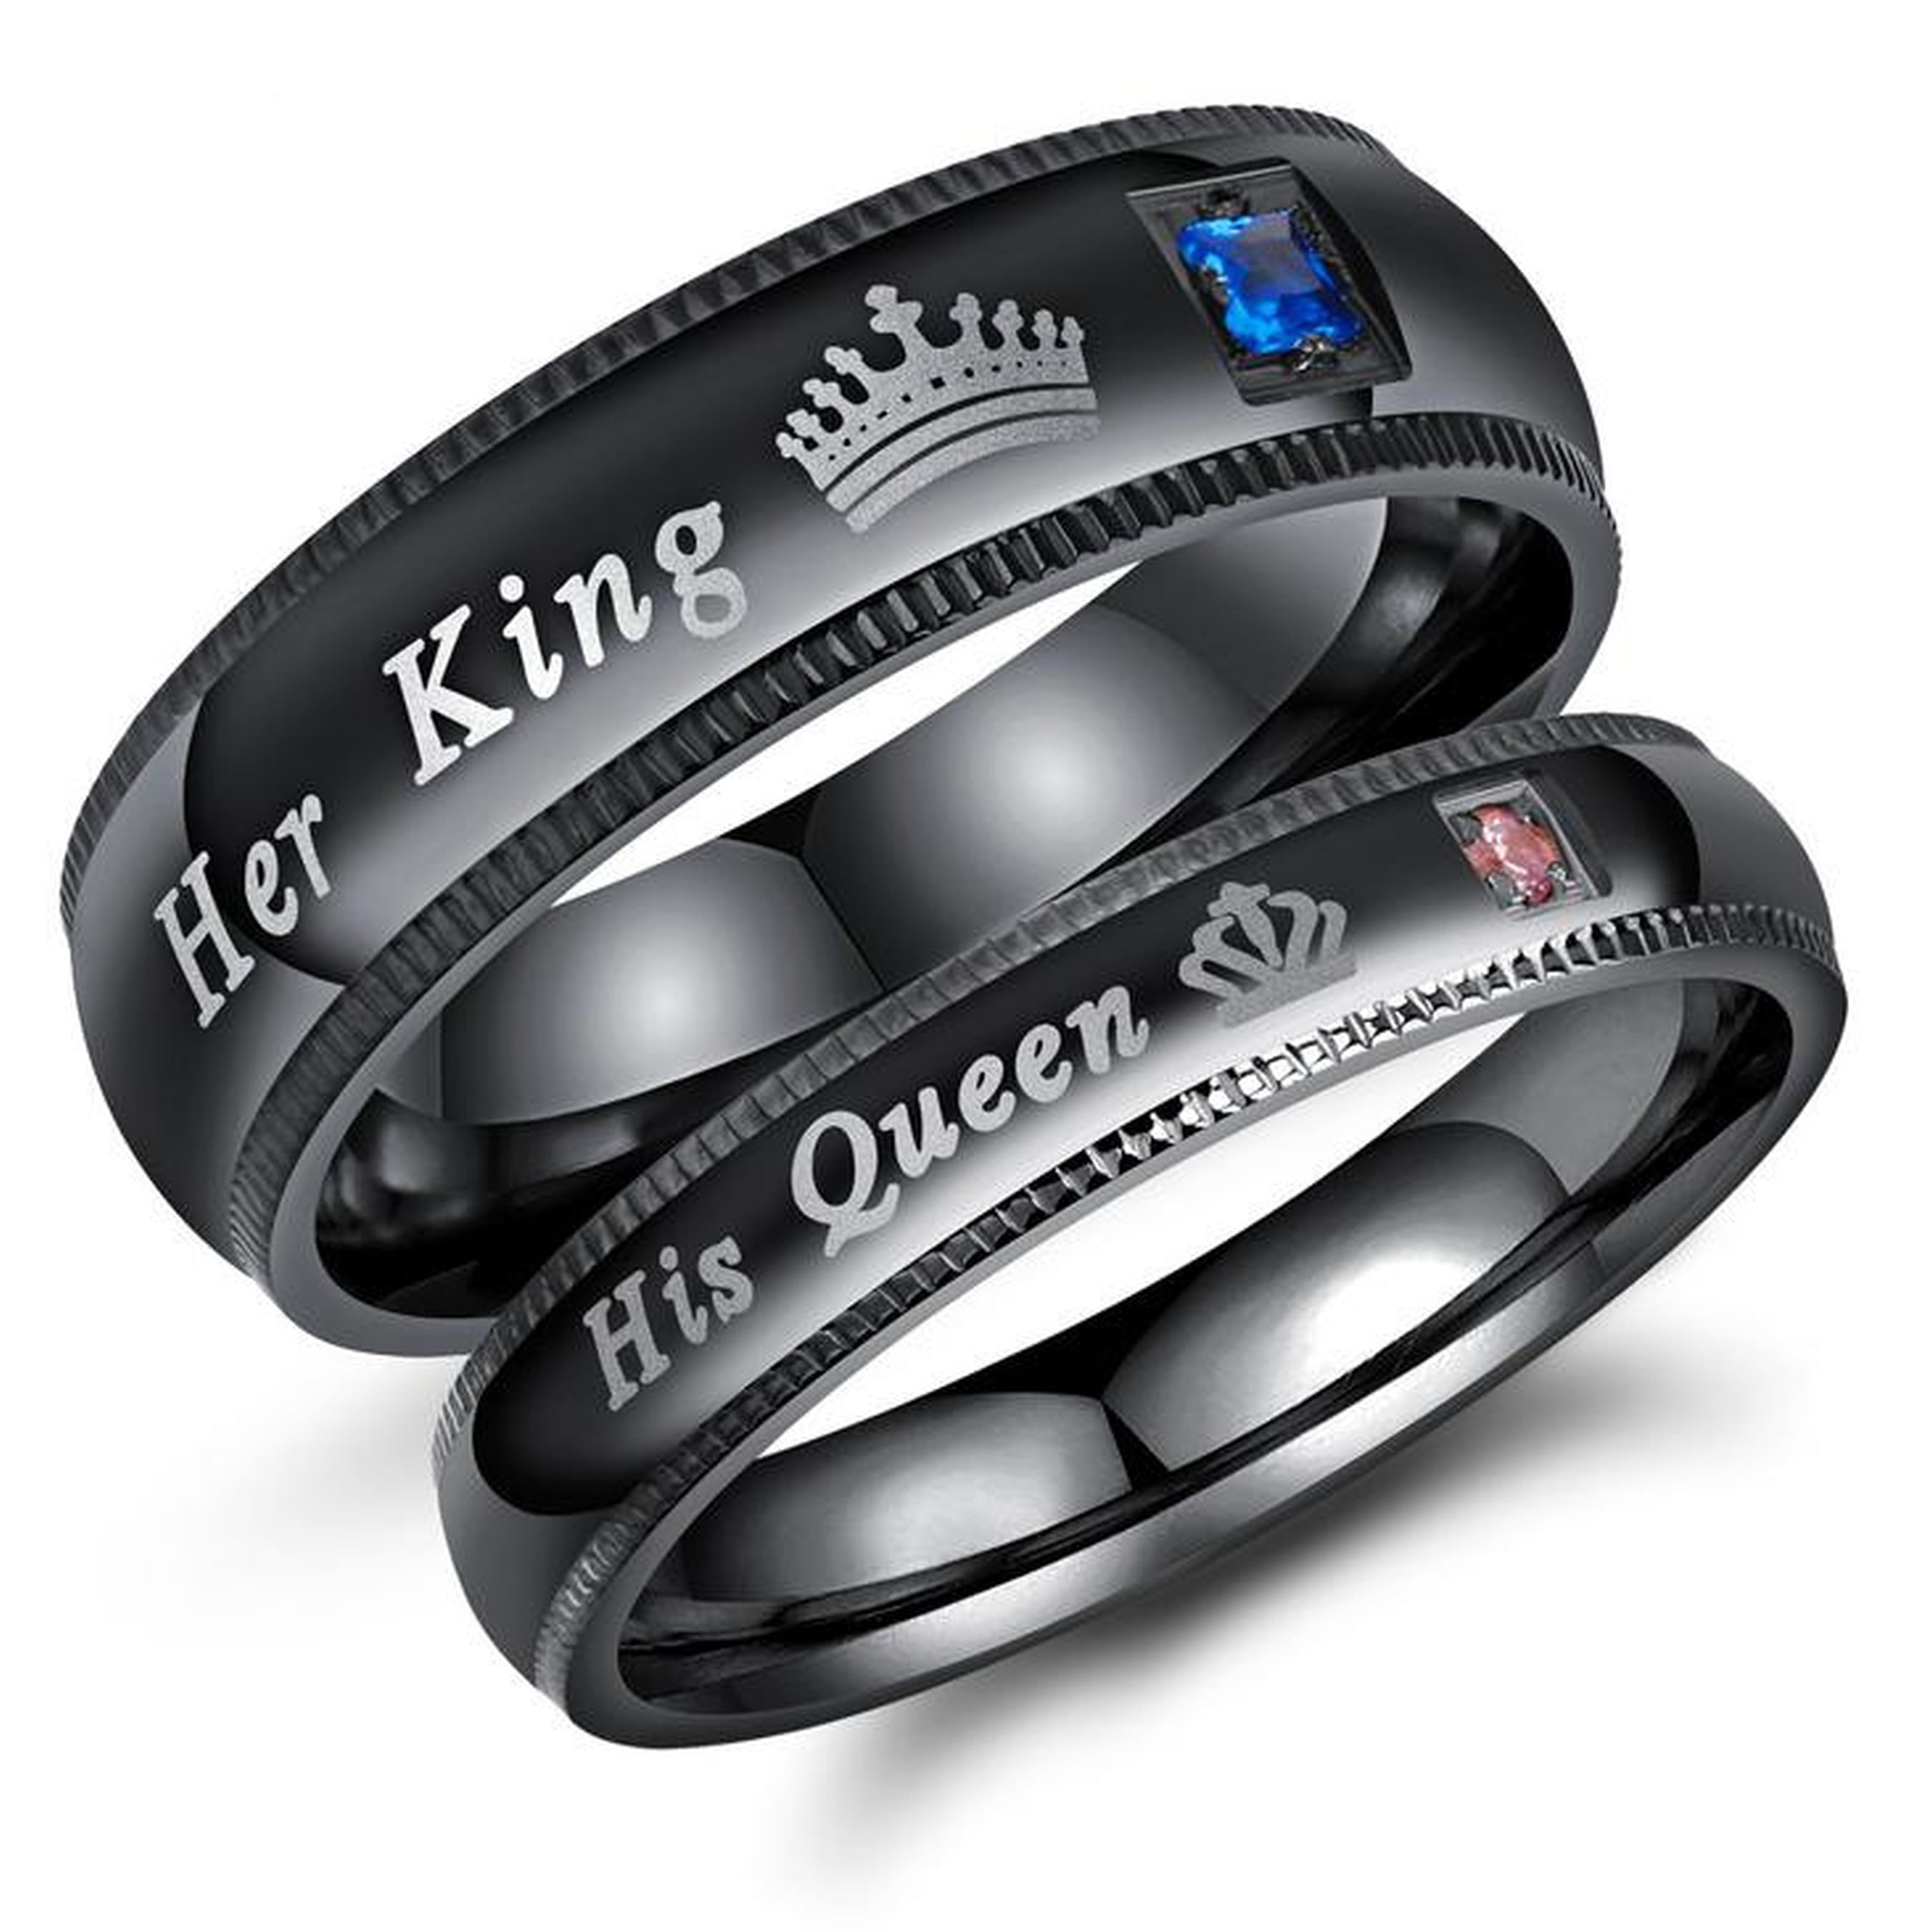 delen dam Verheugen Couple's Matching Promise Ring "His Queen" or "Her King", His or Her  Matching Wedding Band in Stainless Steel, for Men or Women, Milgrain Edge,  Comfort Fit - Walmart.com